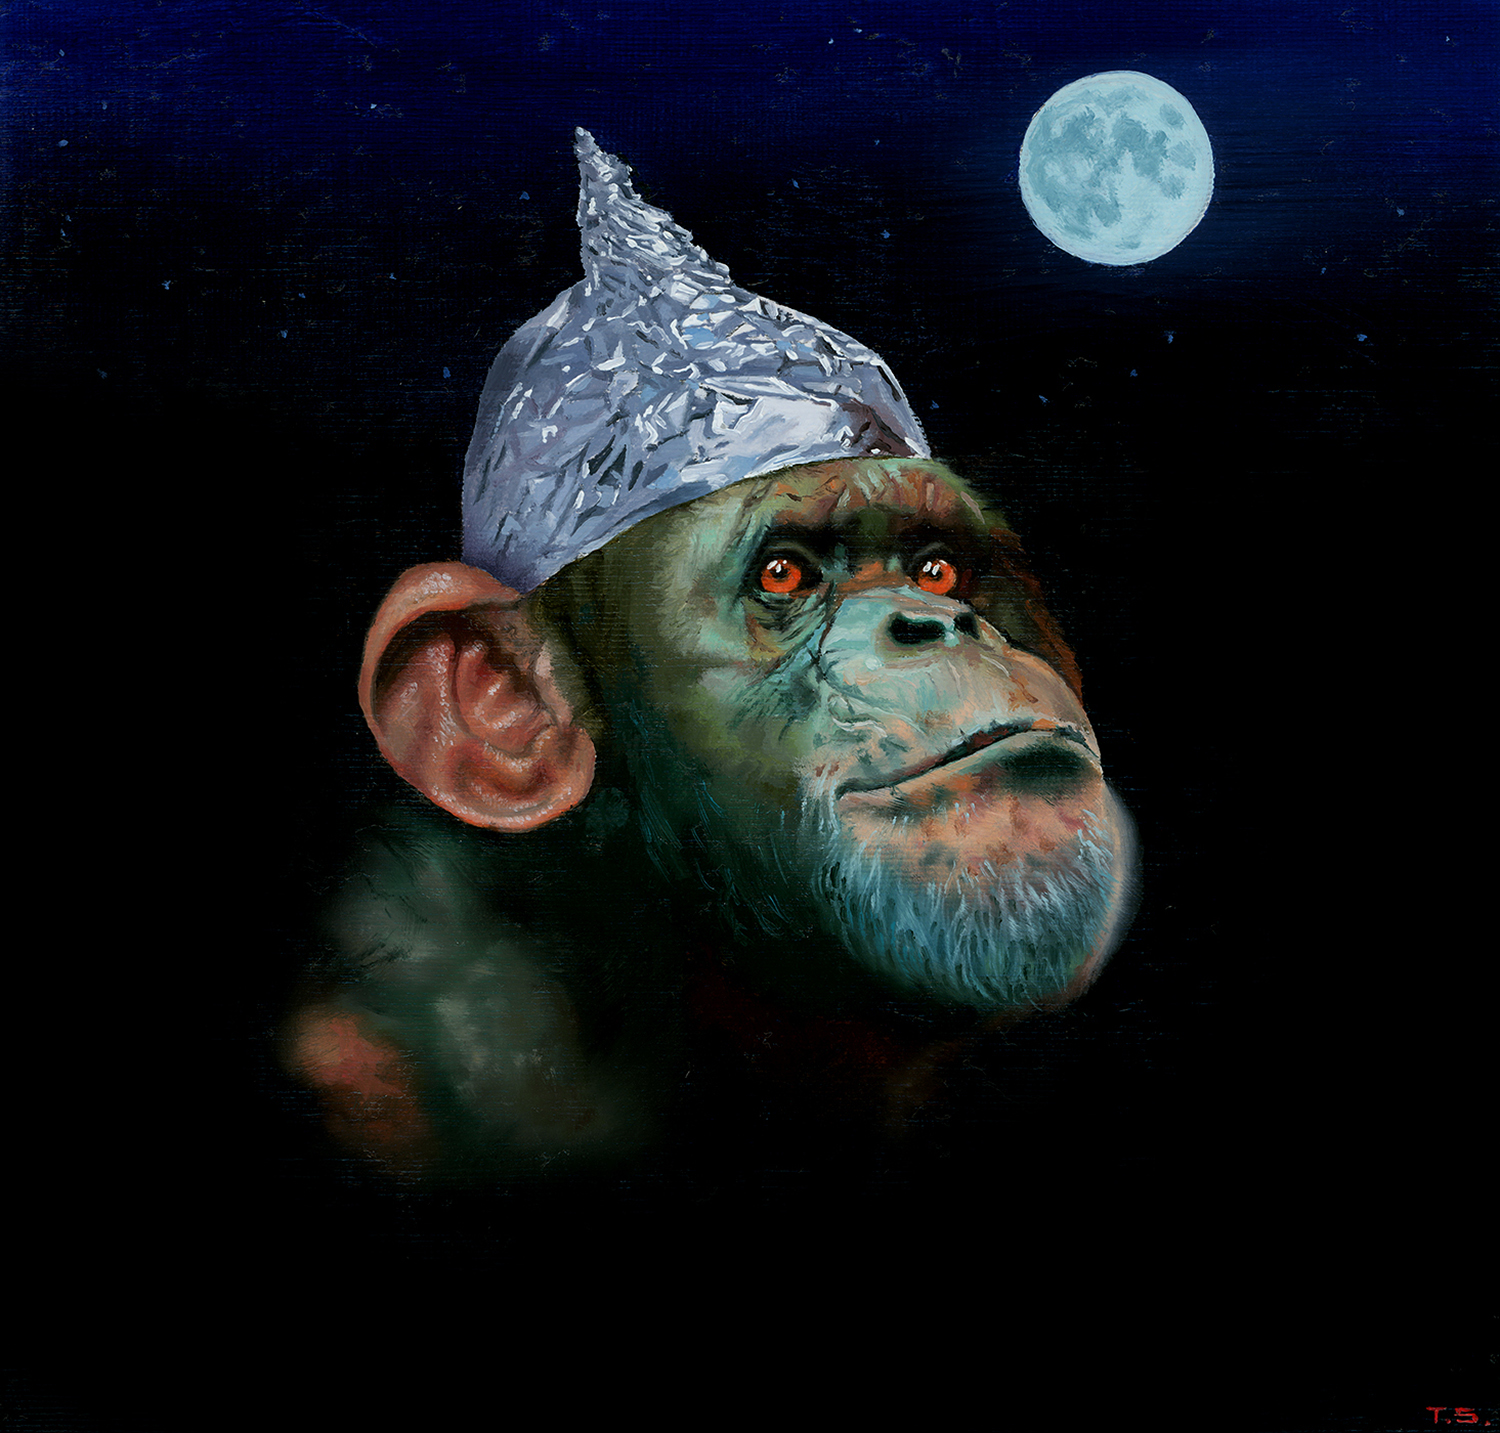 A monkey with a tinfoil hat looking at the moon - Tony South - Signals